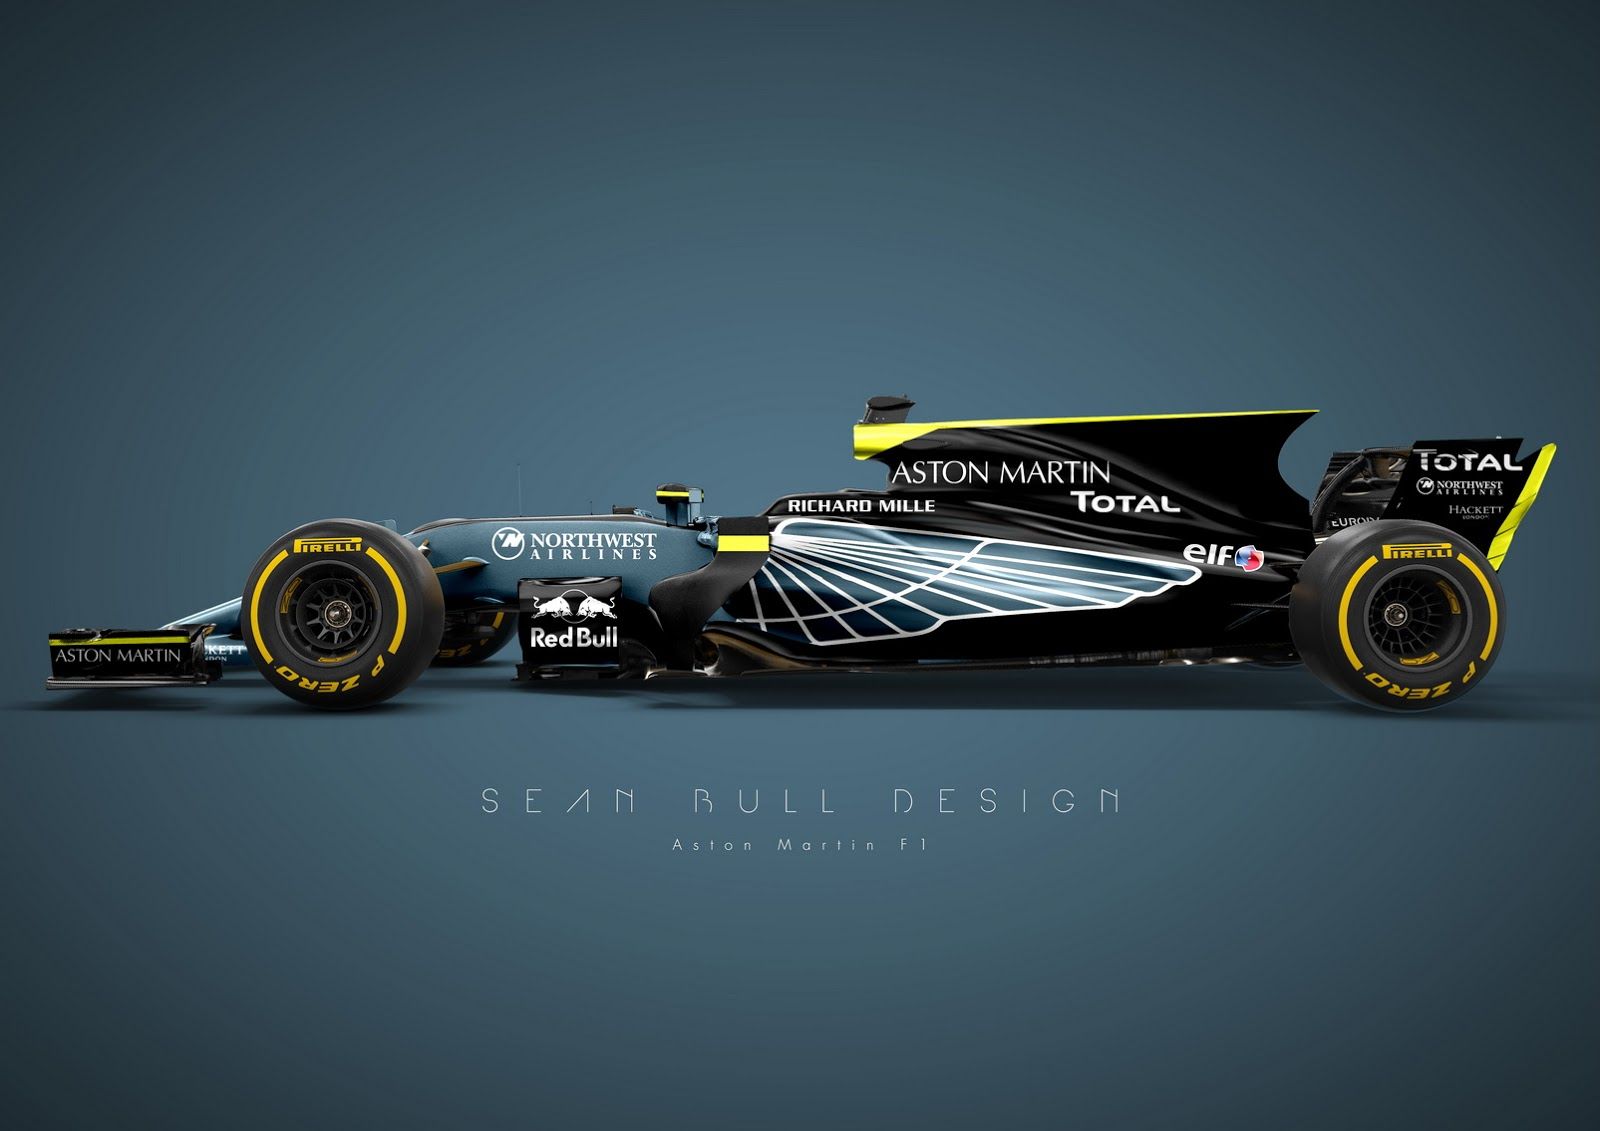 This Is What An Aston Martin F1 Factory Team Could Look Like. Carscoops. Aston martin, Aston, Racing